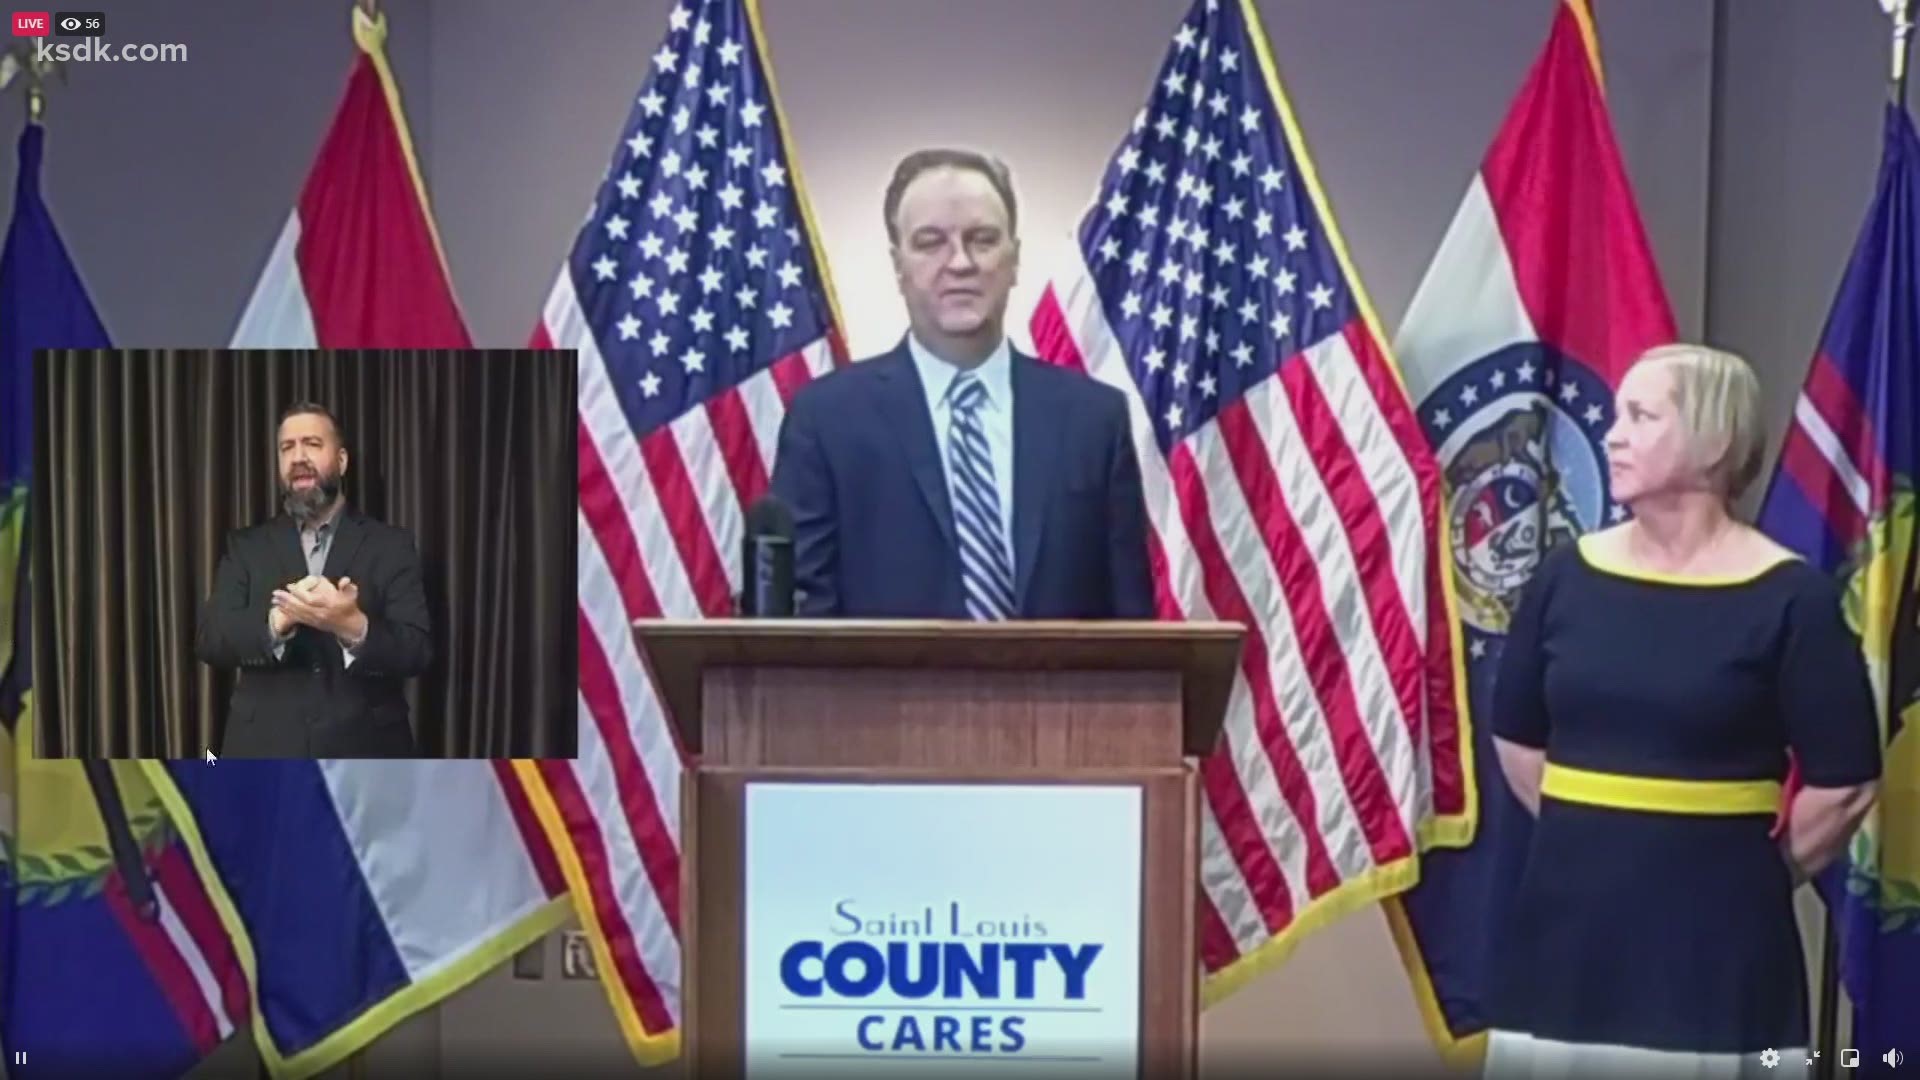 County Executive Sam Page announced the partnership during a briefing Wednesday